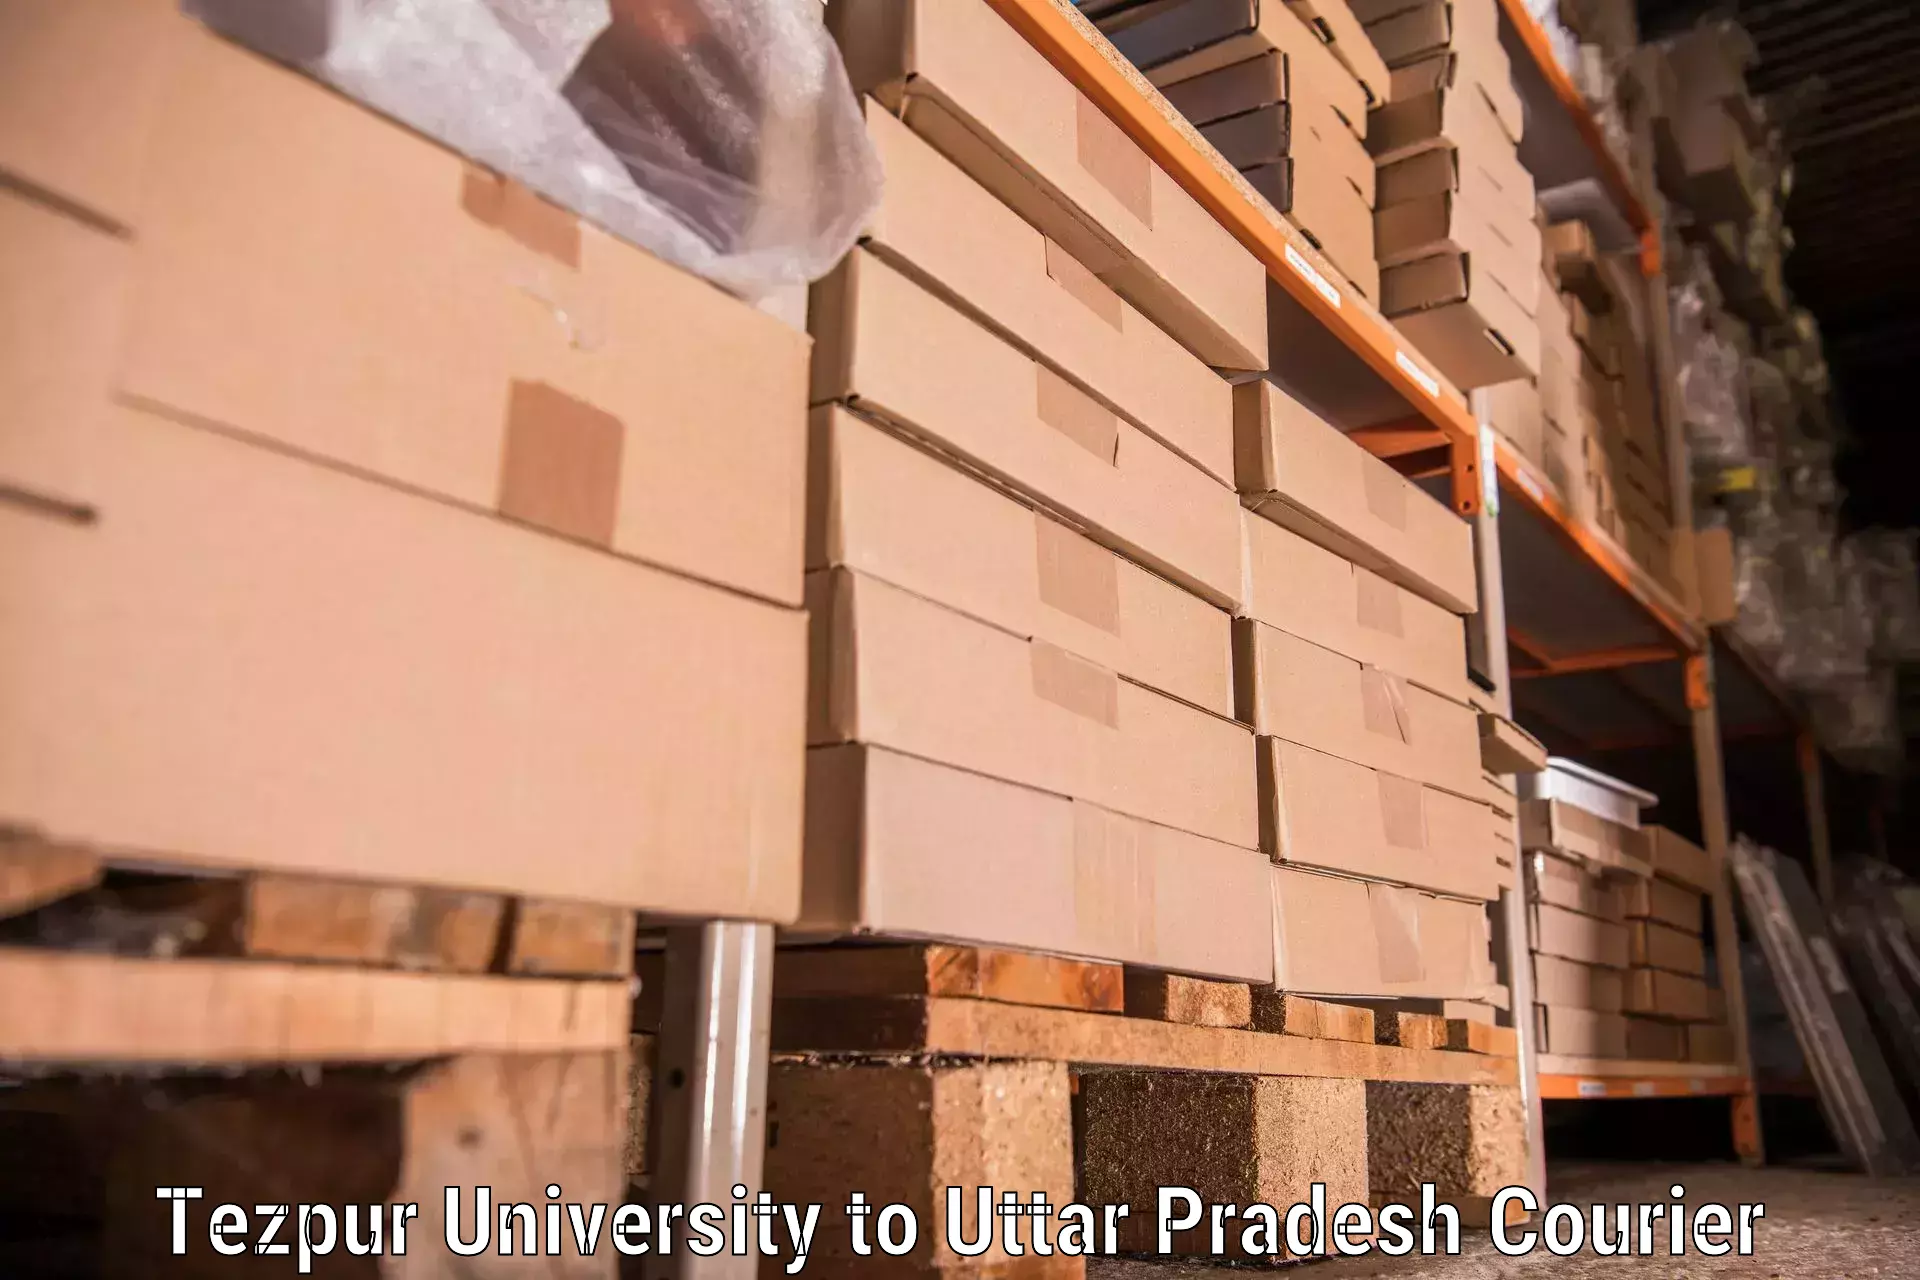 High-quality moving services Tezpur University to Ayodhya